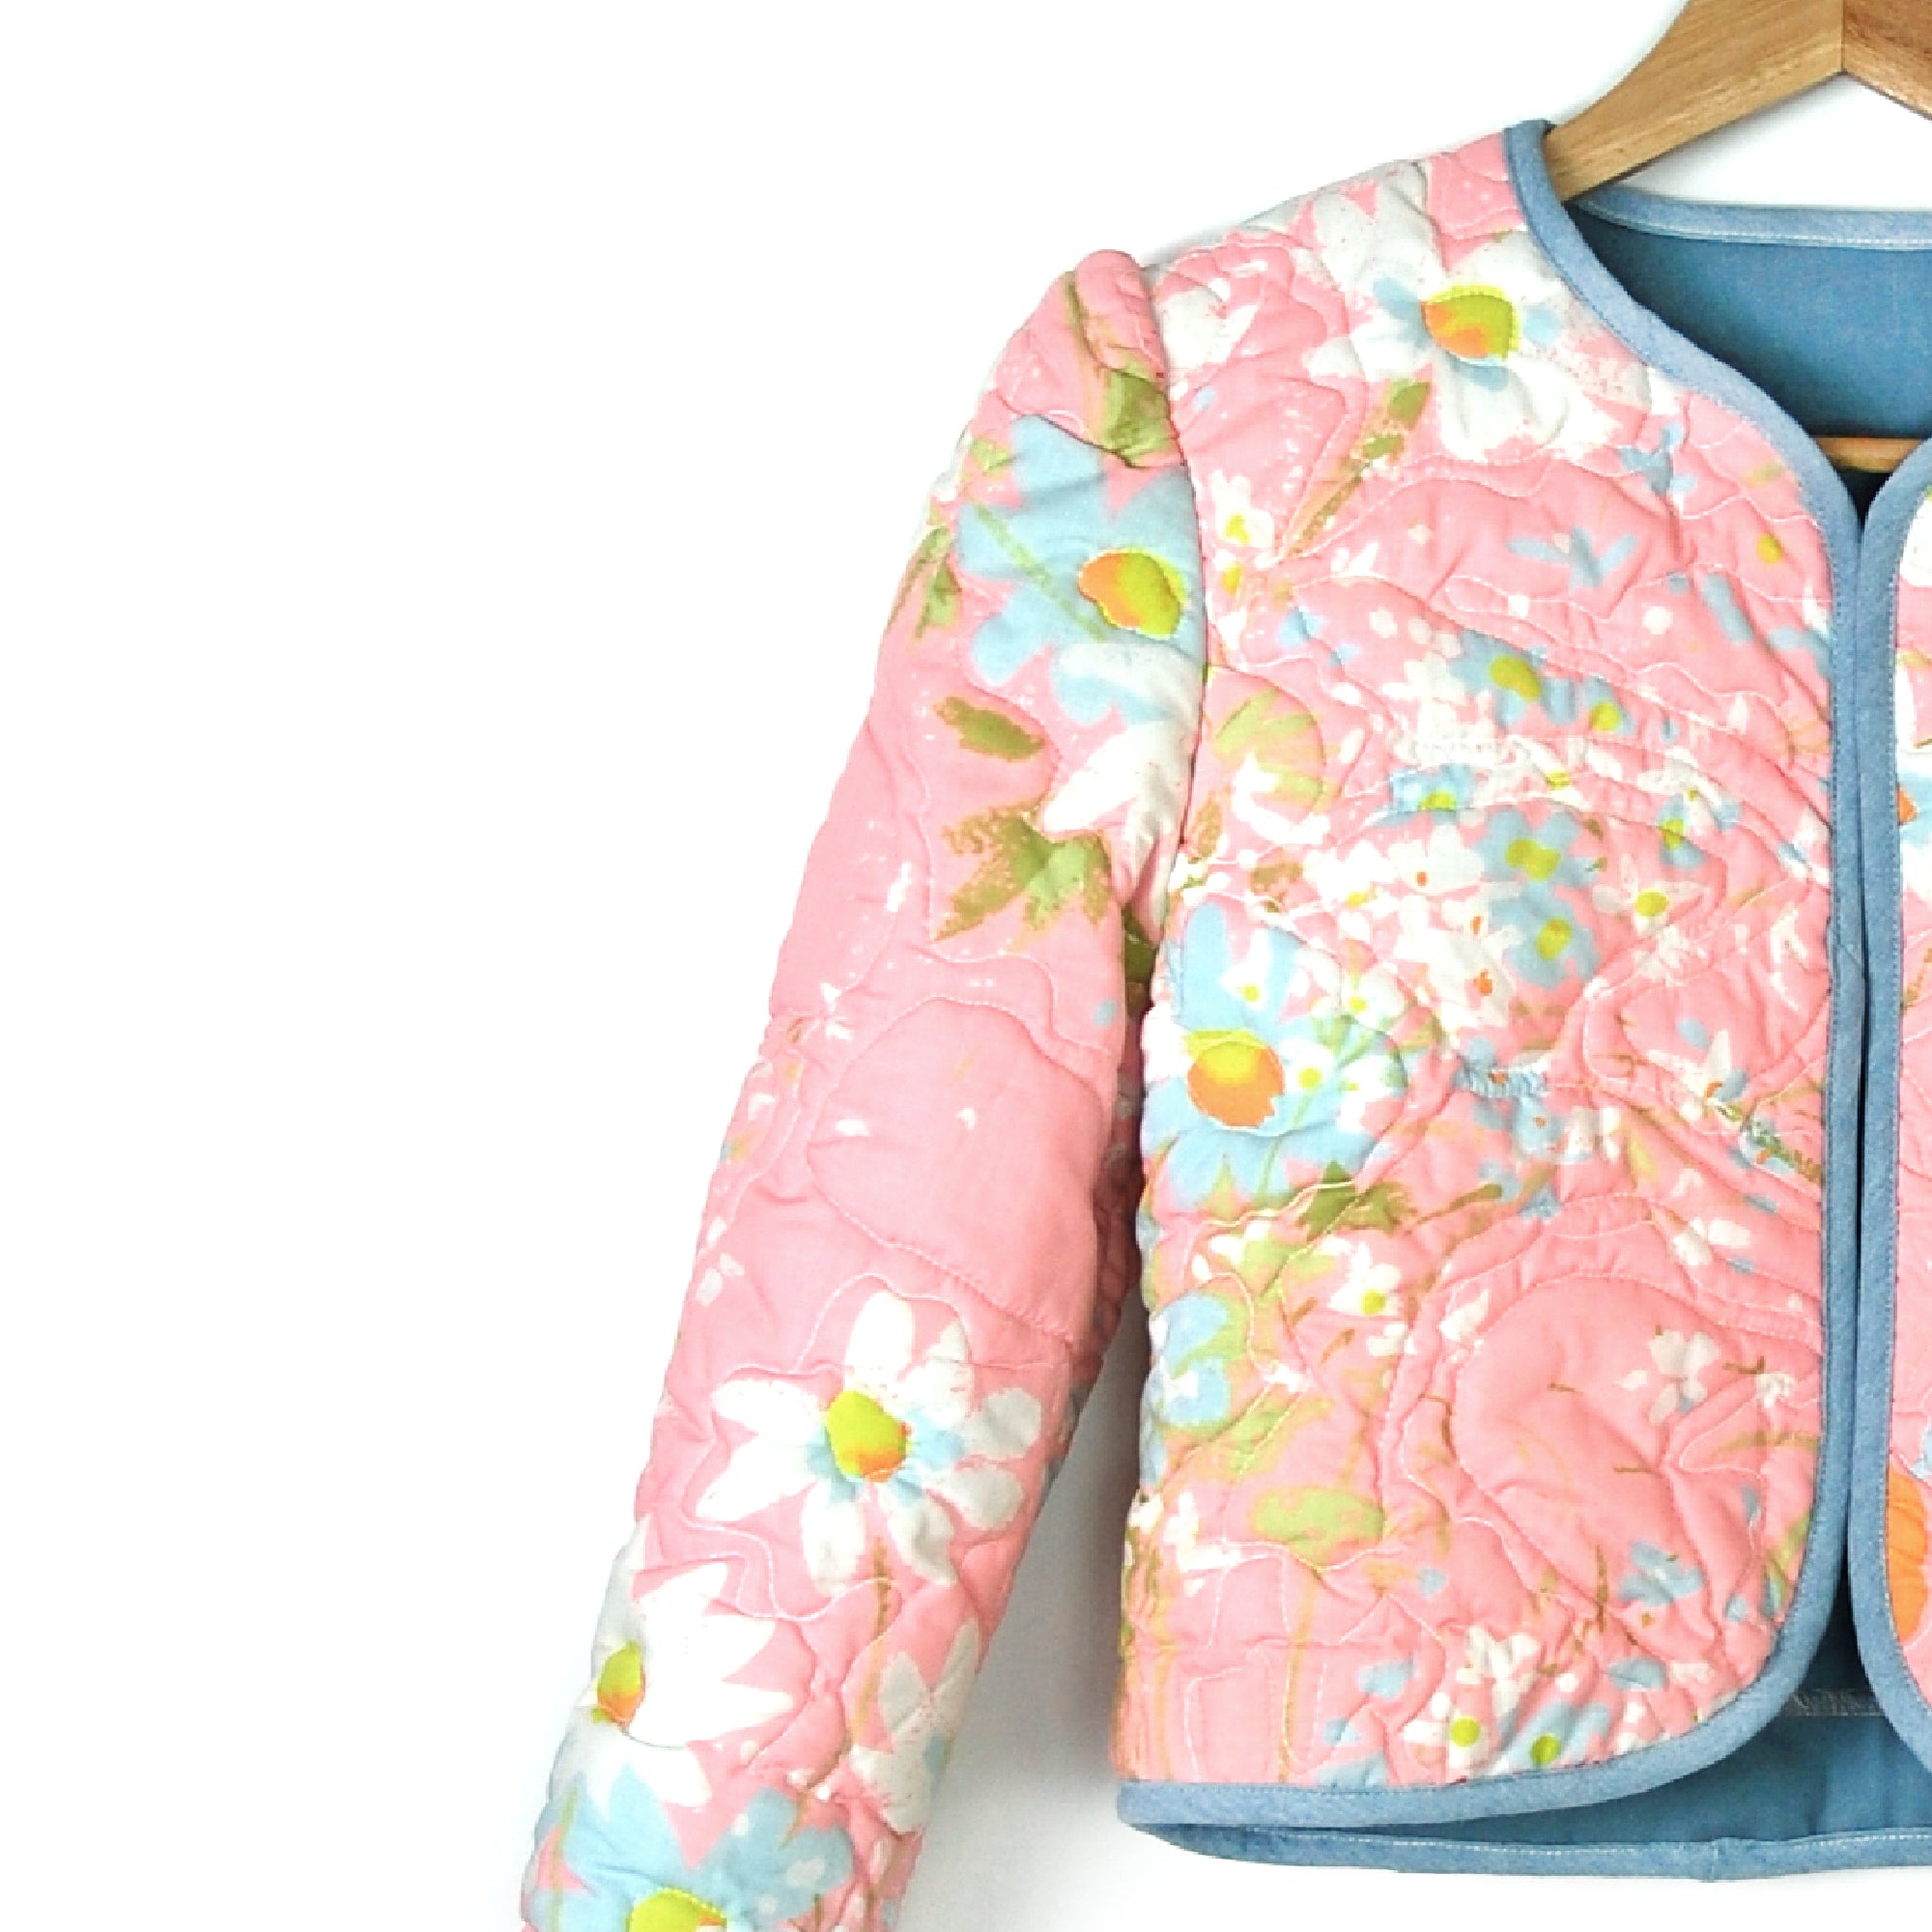 COTTON CANDY GARDEN 1 QUILTED JACKET - Late to the Party